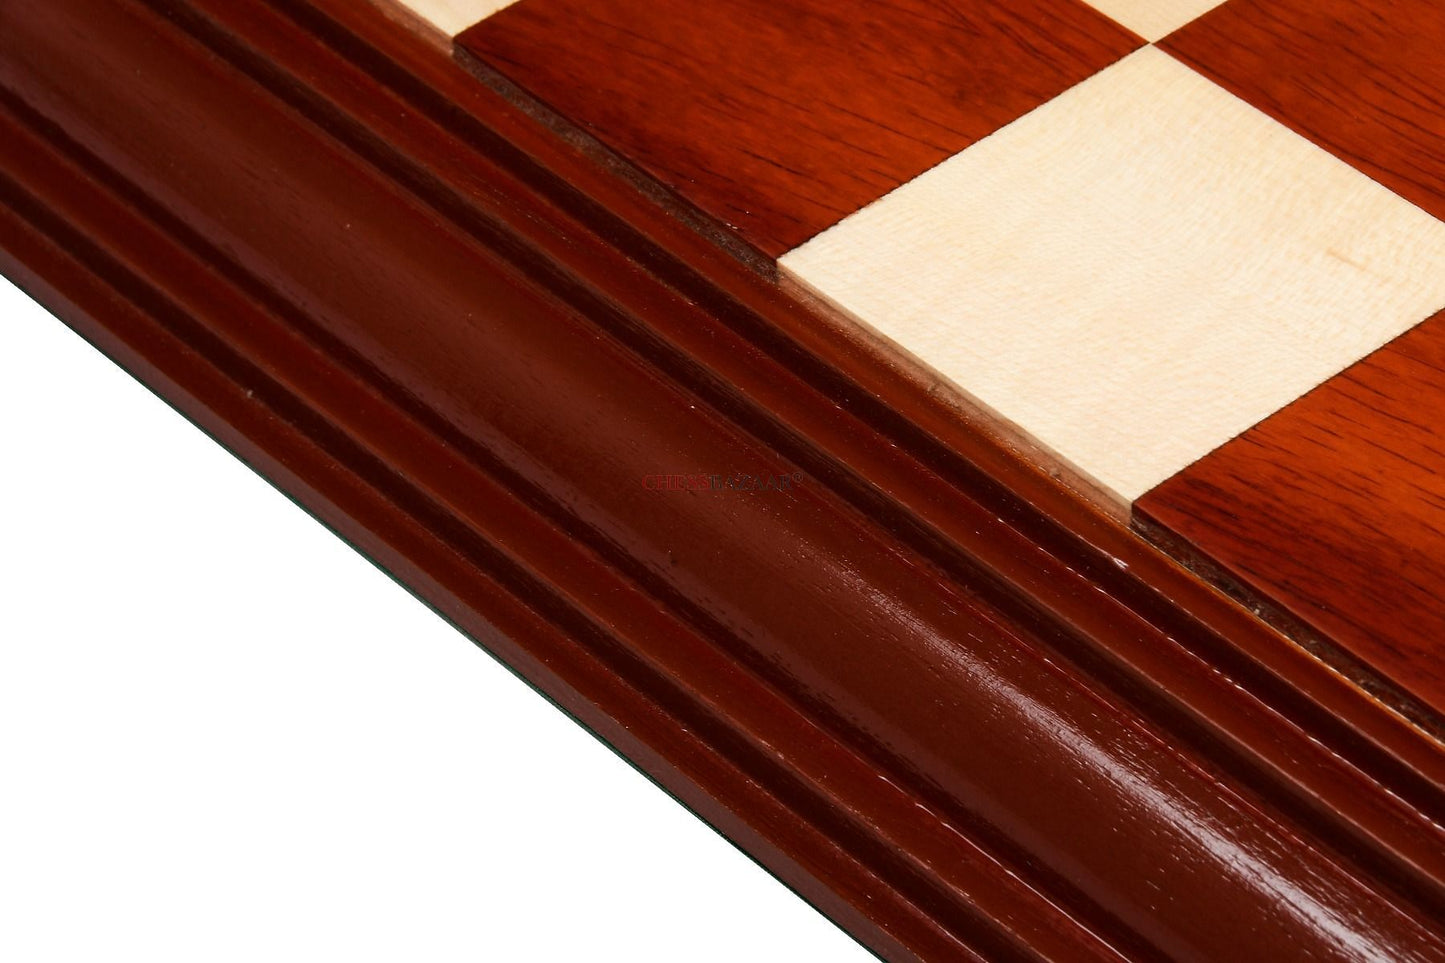 Solid Wooden Luxury Indian Handmade Chess Board in Bud Rosewood (Padauk) & Maple - 21" Board - 55 mm square